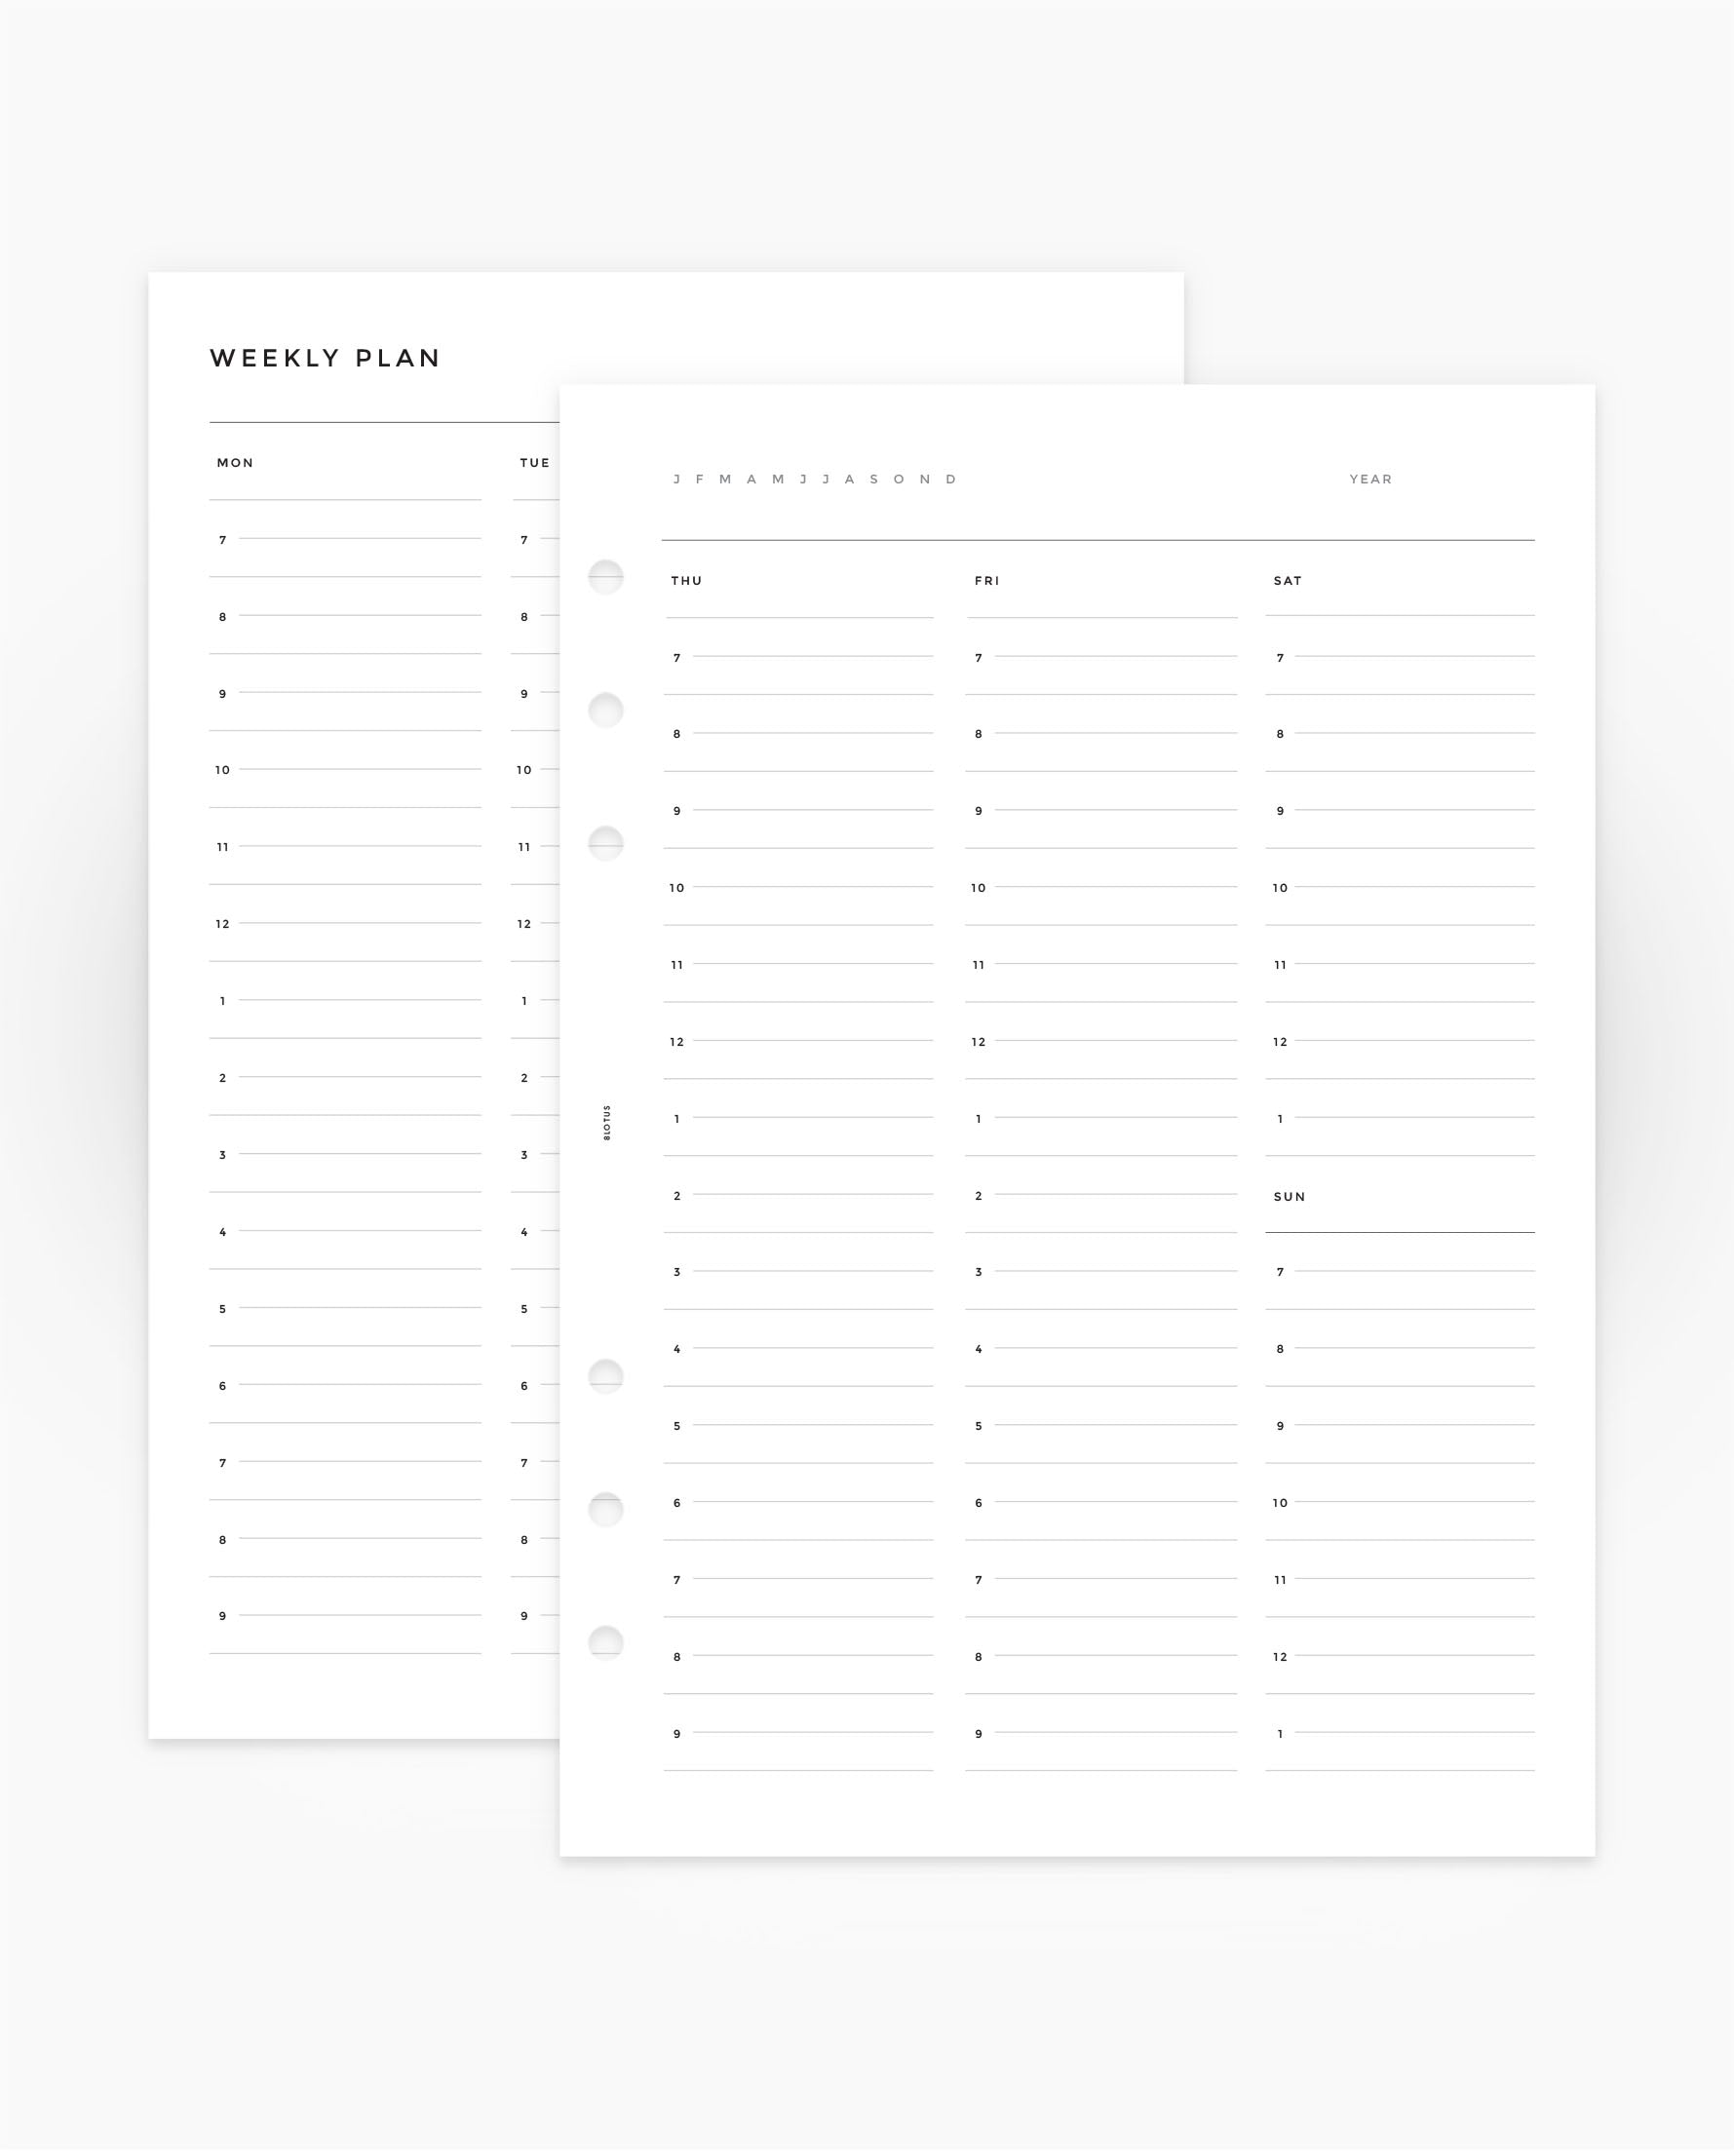 MN236 - Dual Weekly Planner Inserts